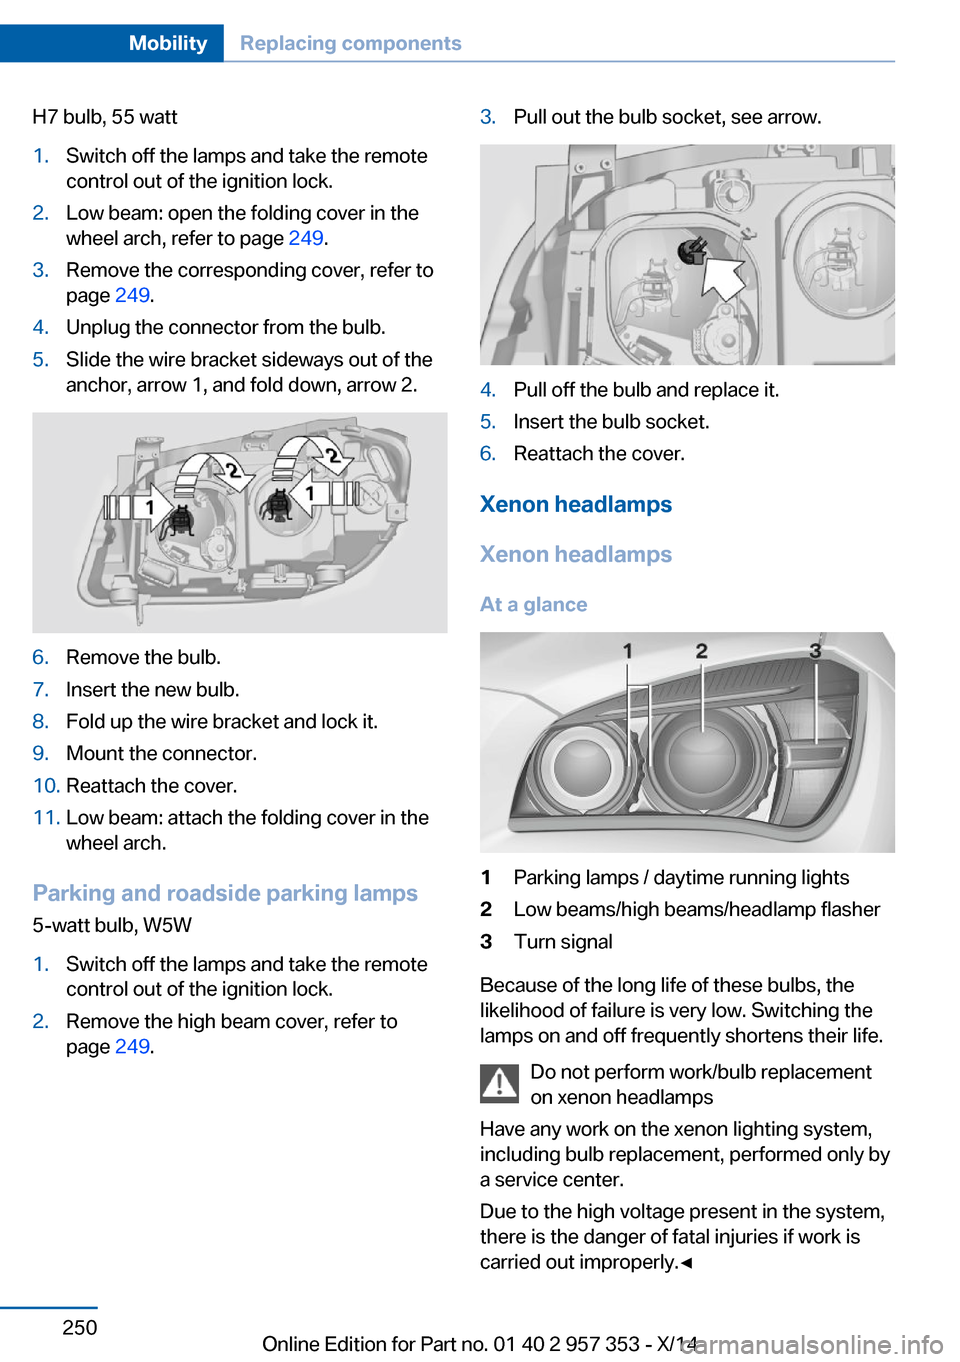 BMW X1 2014 E84 Owners Manual H7 bulb, 55 watt1.Switch off the lamps and take the remote
control out of the ignition lock.2.Low beam: open the folding cover in the
wheel arch, refer to page  249.3.Remove the corresponding cover, r